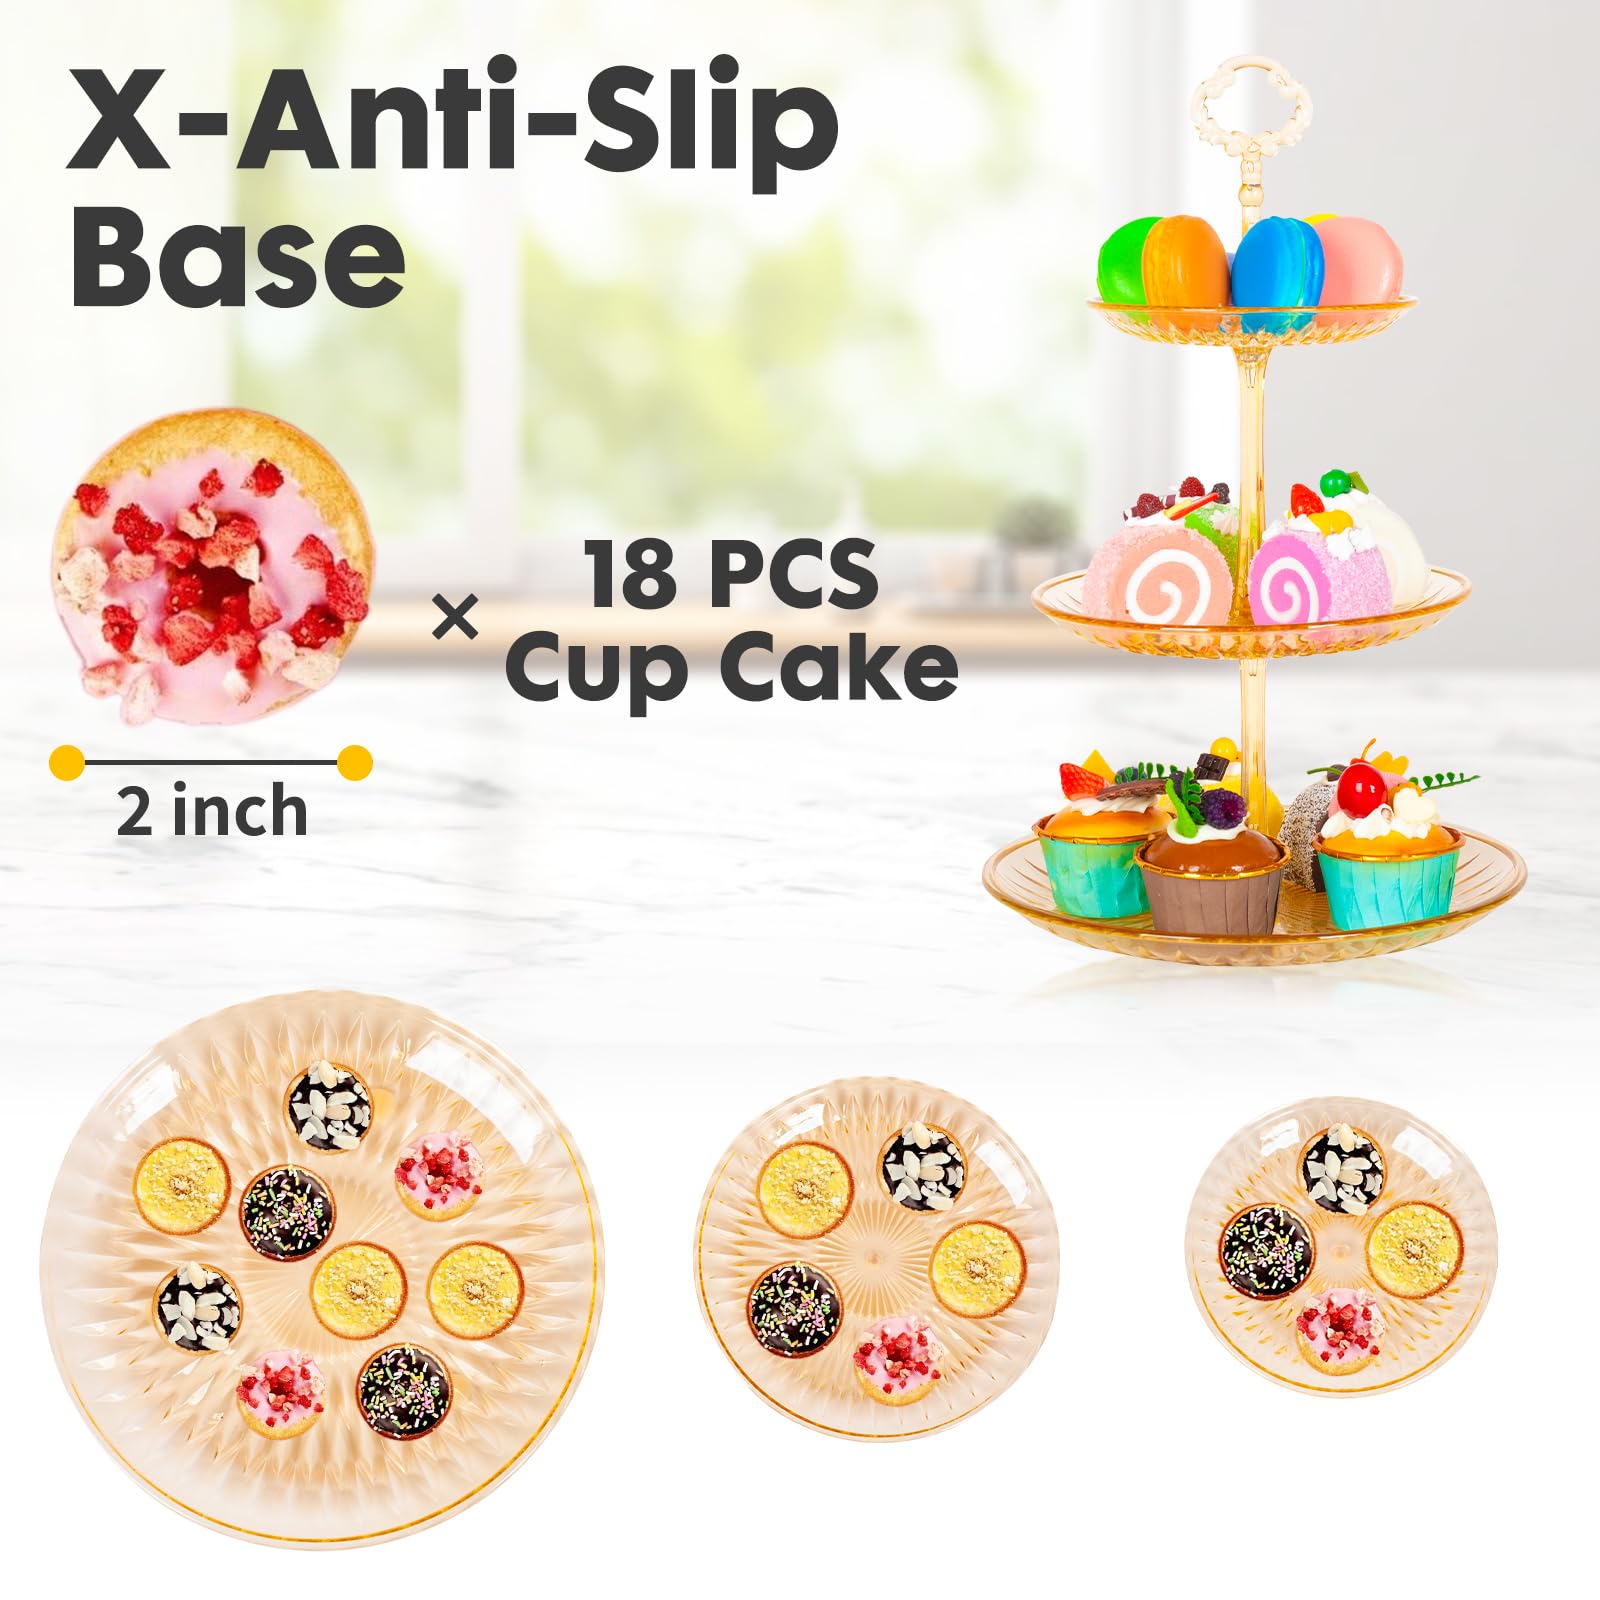 ShellKingdom 2 Pack Clear Cupcake Stand, 3 Tier Serving Tray Cupcake Dessert Candy Fruit Display Holder for Wedding, Christmas, Baby Shower Birthday Tea Party